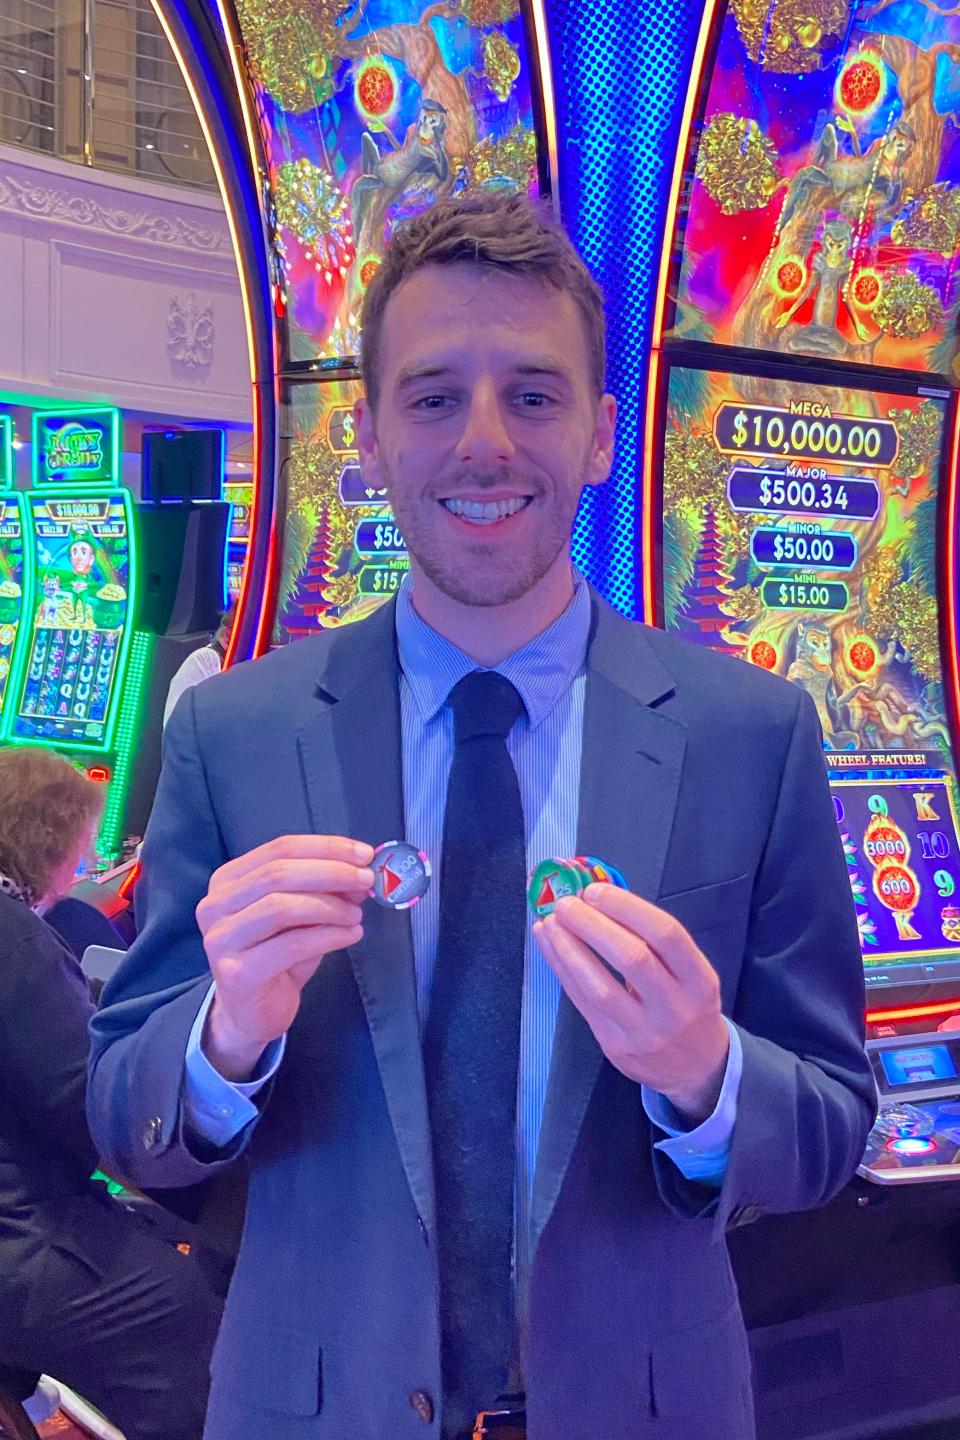 Man in a suit holding casino chips, standing in front of slot machines